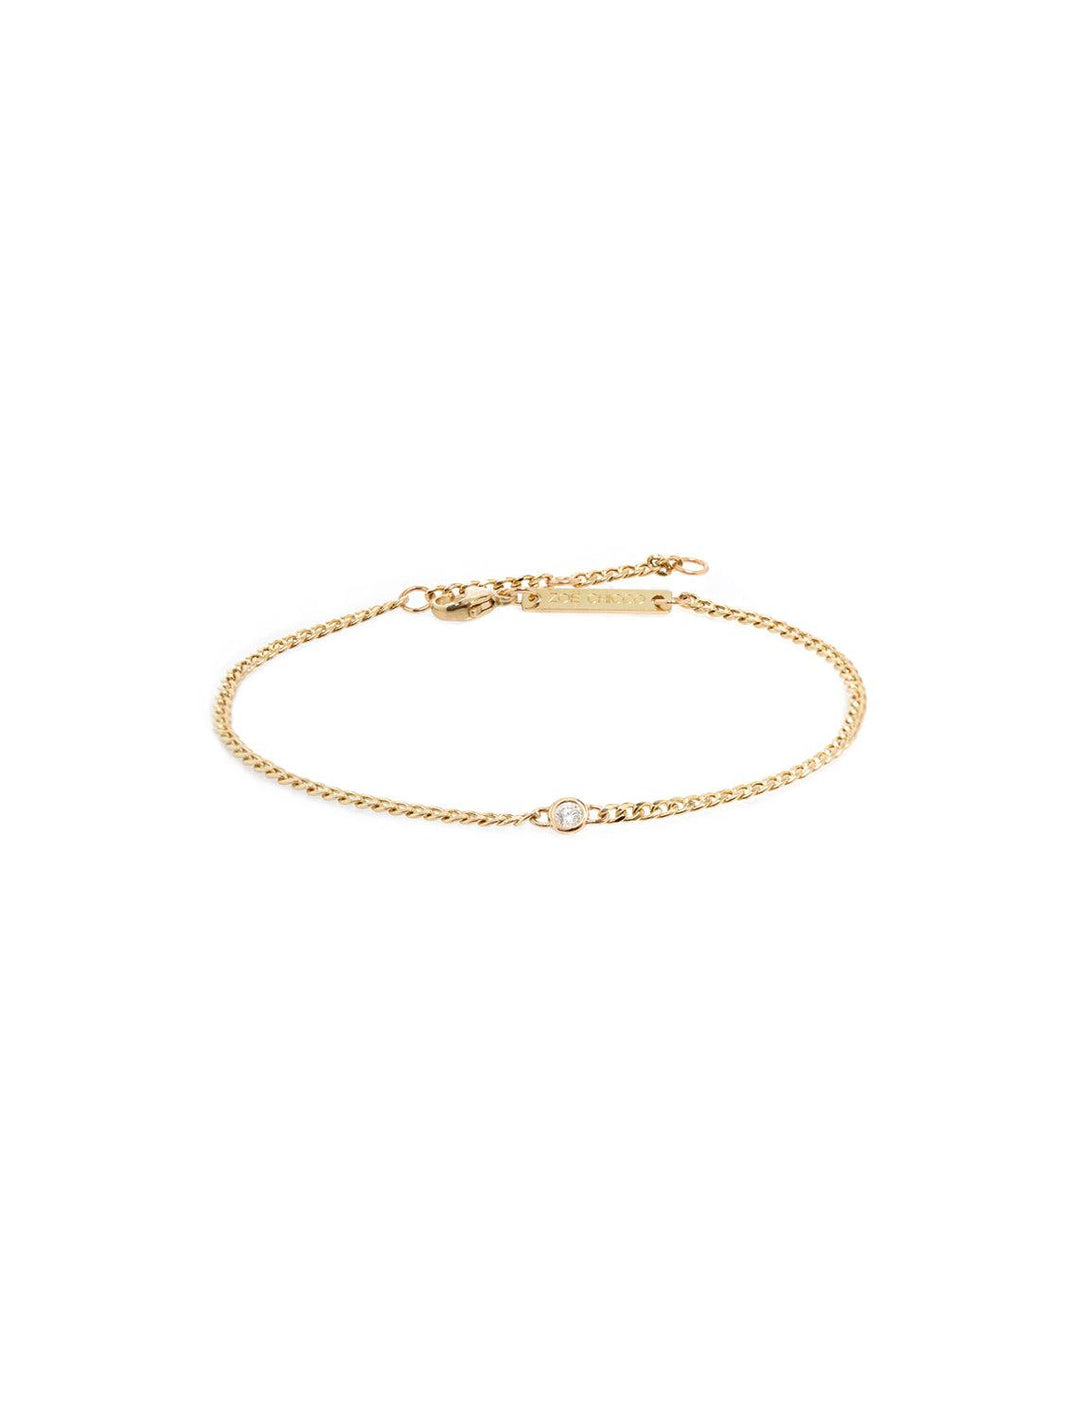 Front view of Zoe Chicco's 14k extra small curb chain with floating diamond bracelet | 6-7"